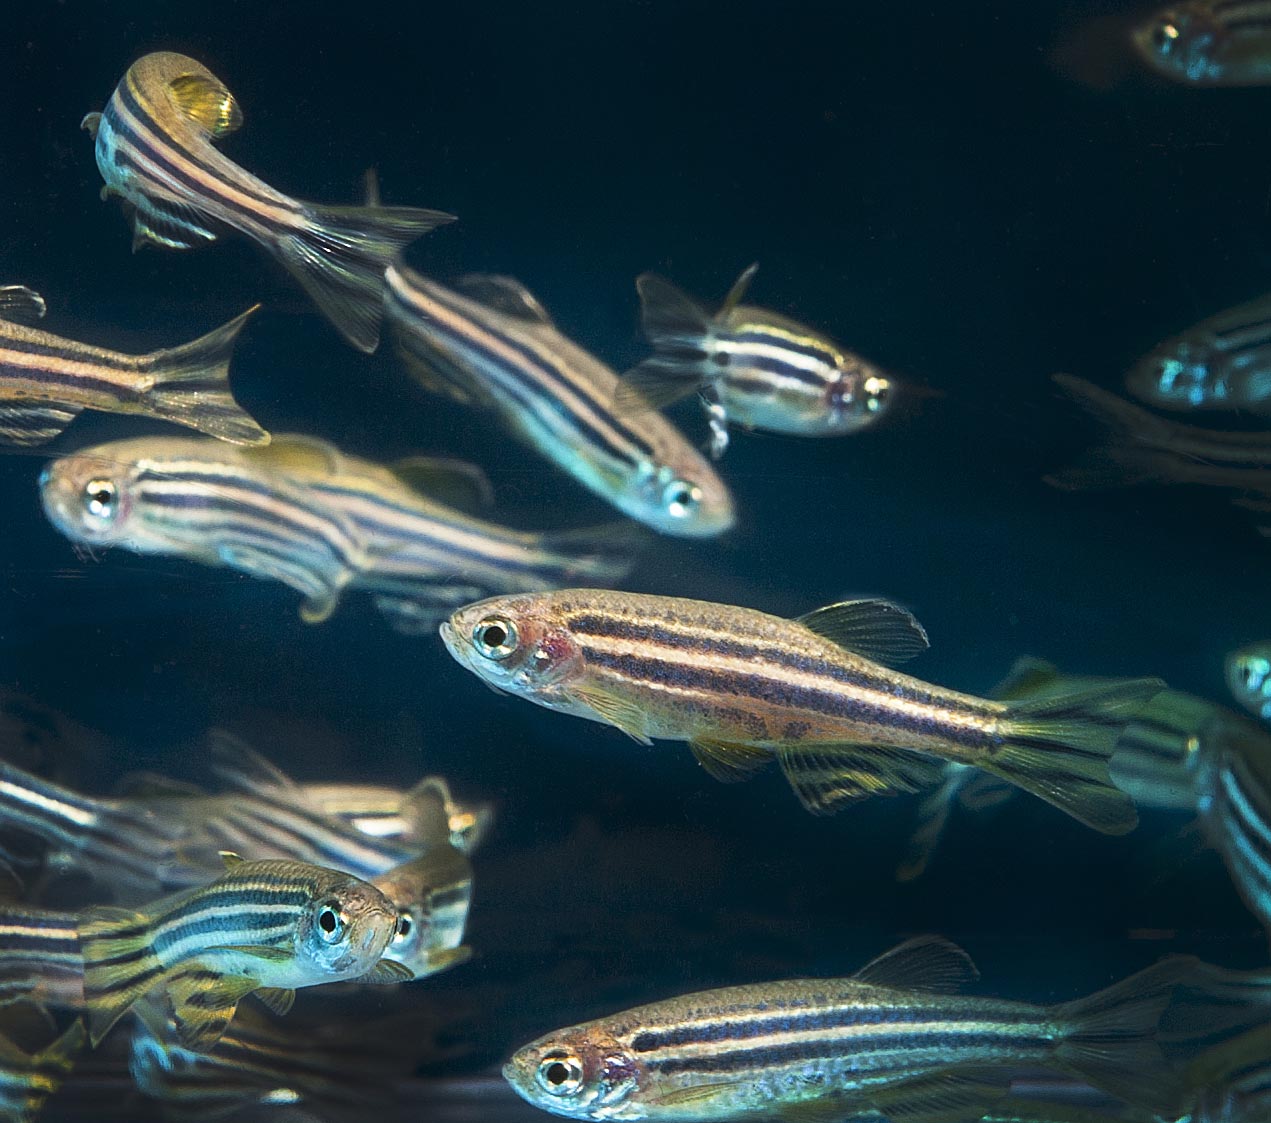 A group of adult zebrafish swimming in a tank